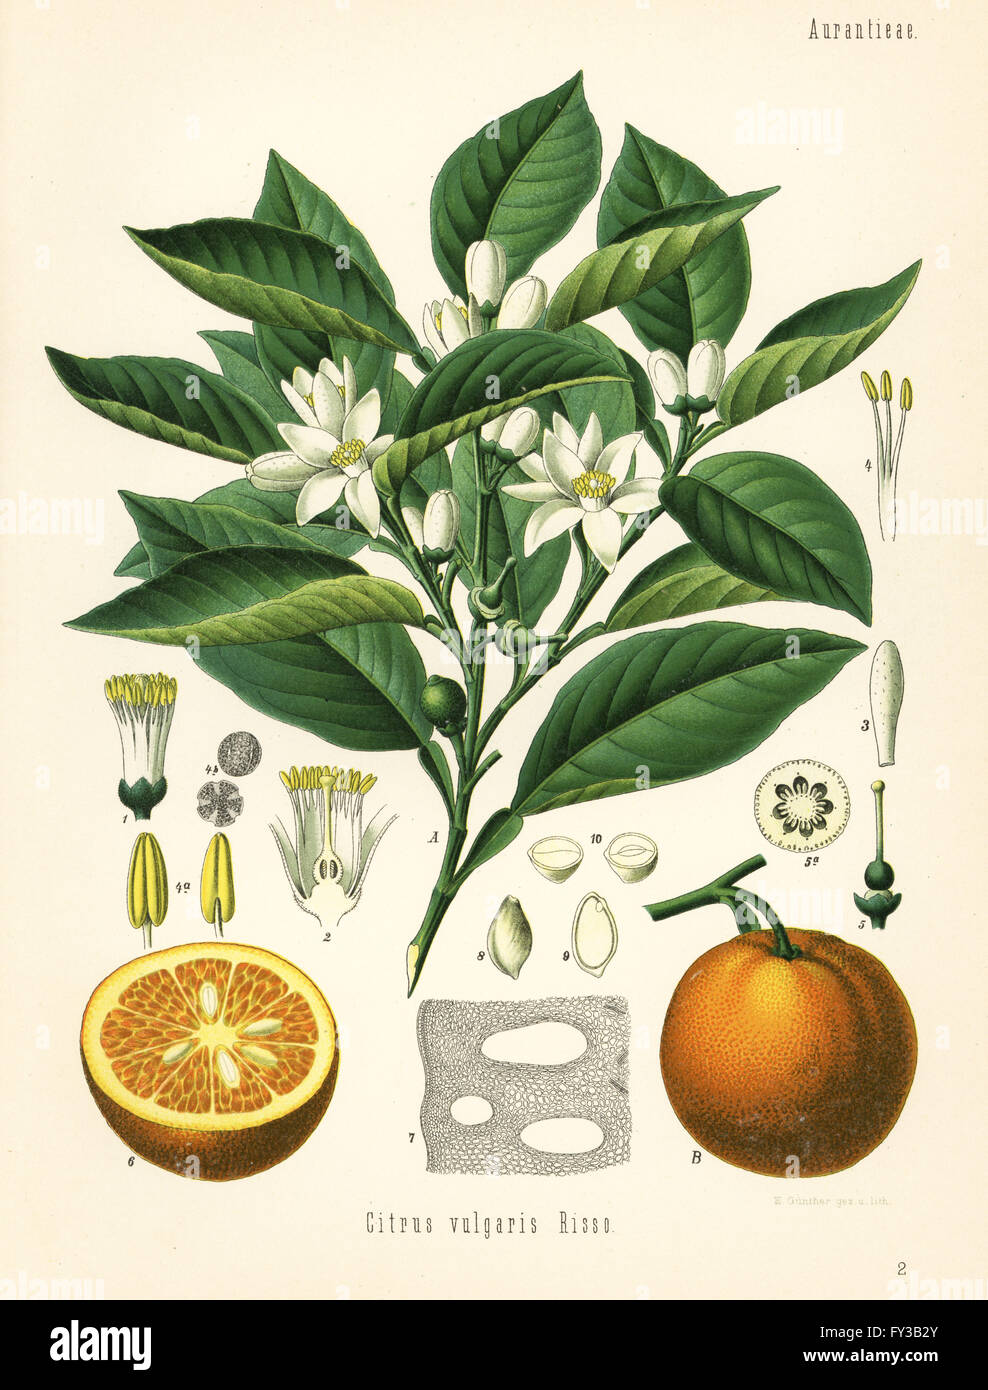 Orange tree and fruit, Citrus aurantium (Citrus vulgaris). Chromolithograph by E. Gunther after a botanical illustration from Hermann Adolph Koehler's Medicinal Plants, edited by Gustav Pabst, Koehler, Germany, 1887. Stock Photo